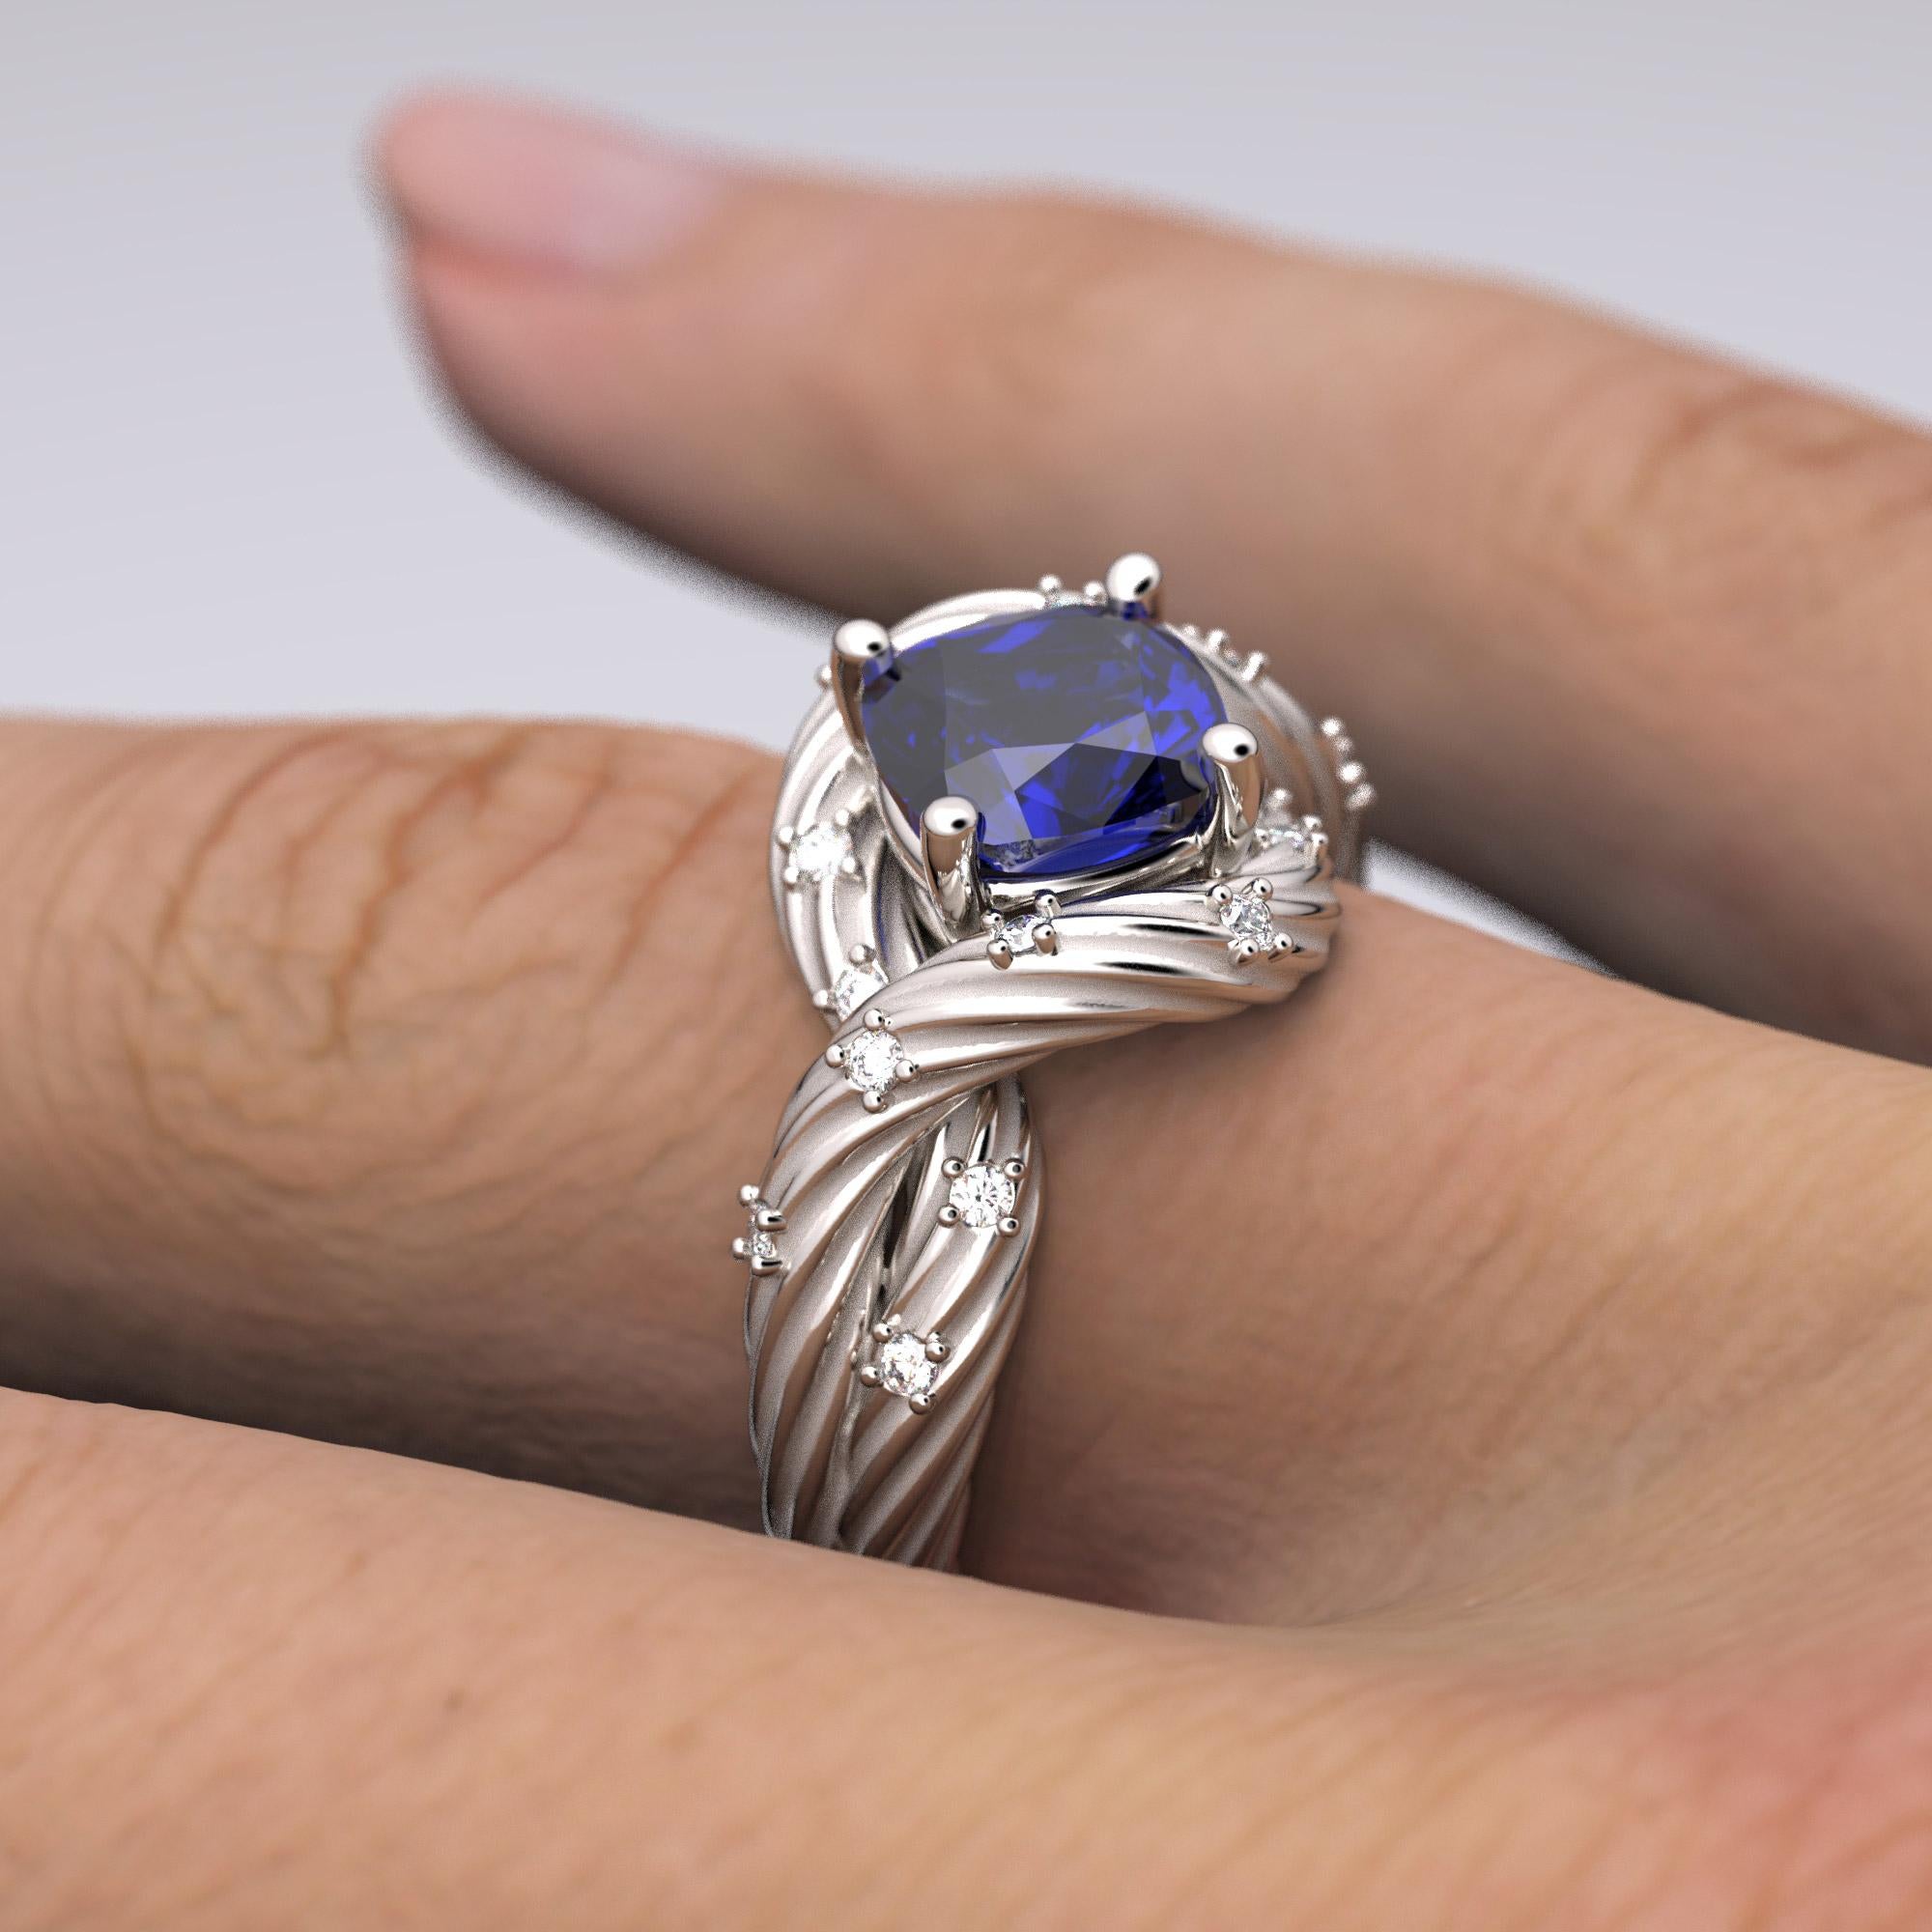 For Sale:  Tanzanite and Diamonds Ring 14k Solid Gold, Italian Fine Jewelry, made to order. 14